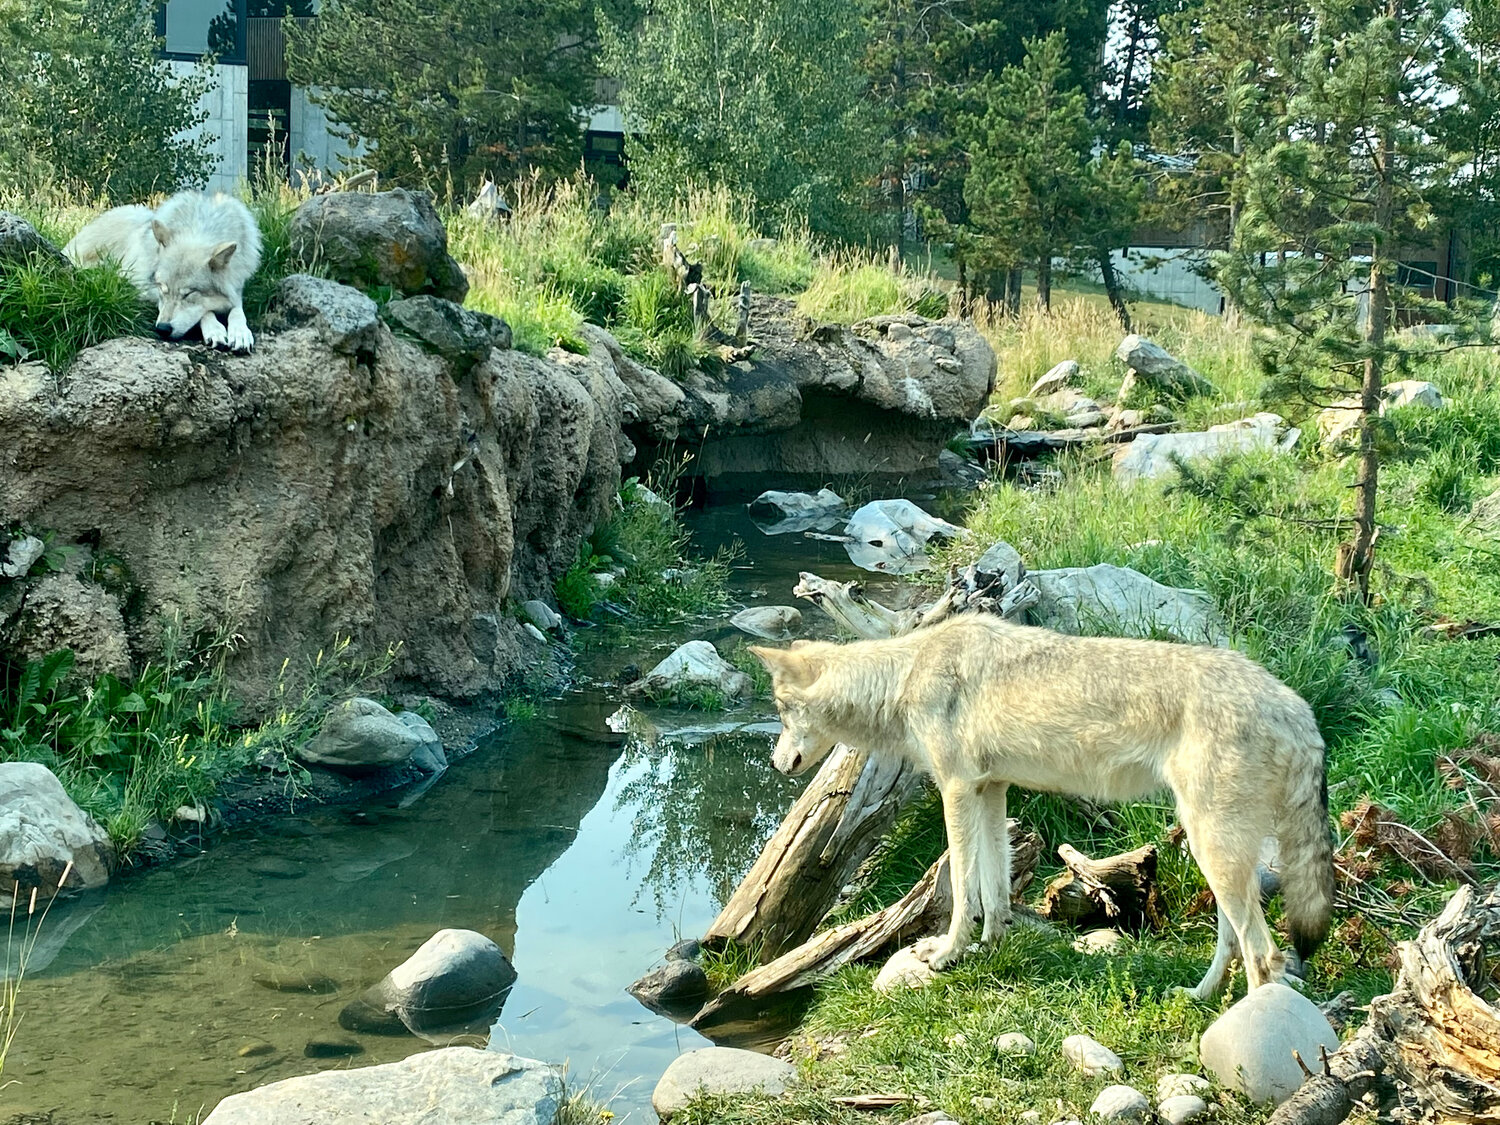 Wolves at the Wolf and Grizzly Bear Discovery Center in West Yellowstone, Montana, laze along a creek in this September 2022 file photo. Daniel resident Cody Robert was recently cited $250 for possession of a live wolf, which he allegedly tortured before killing. Animal welfare groups are calling upon Sublette County authorities to take action and bring felony-level penalties against Roberts.